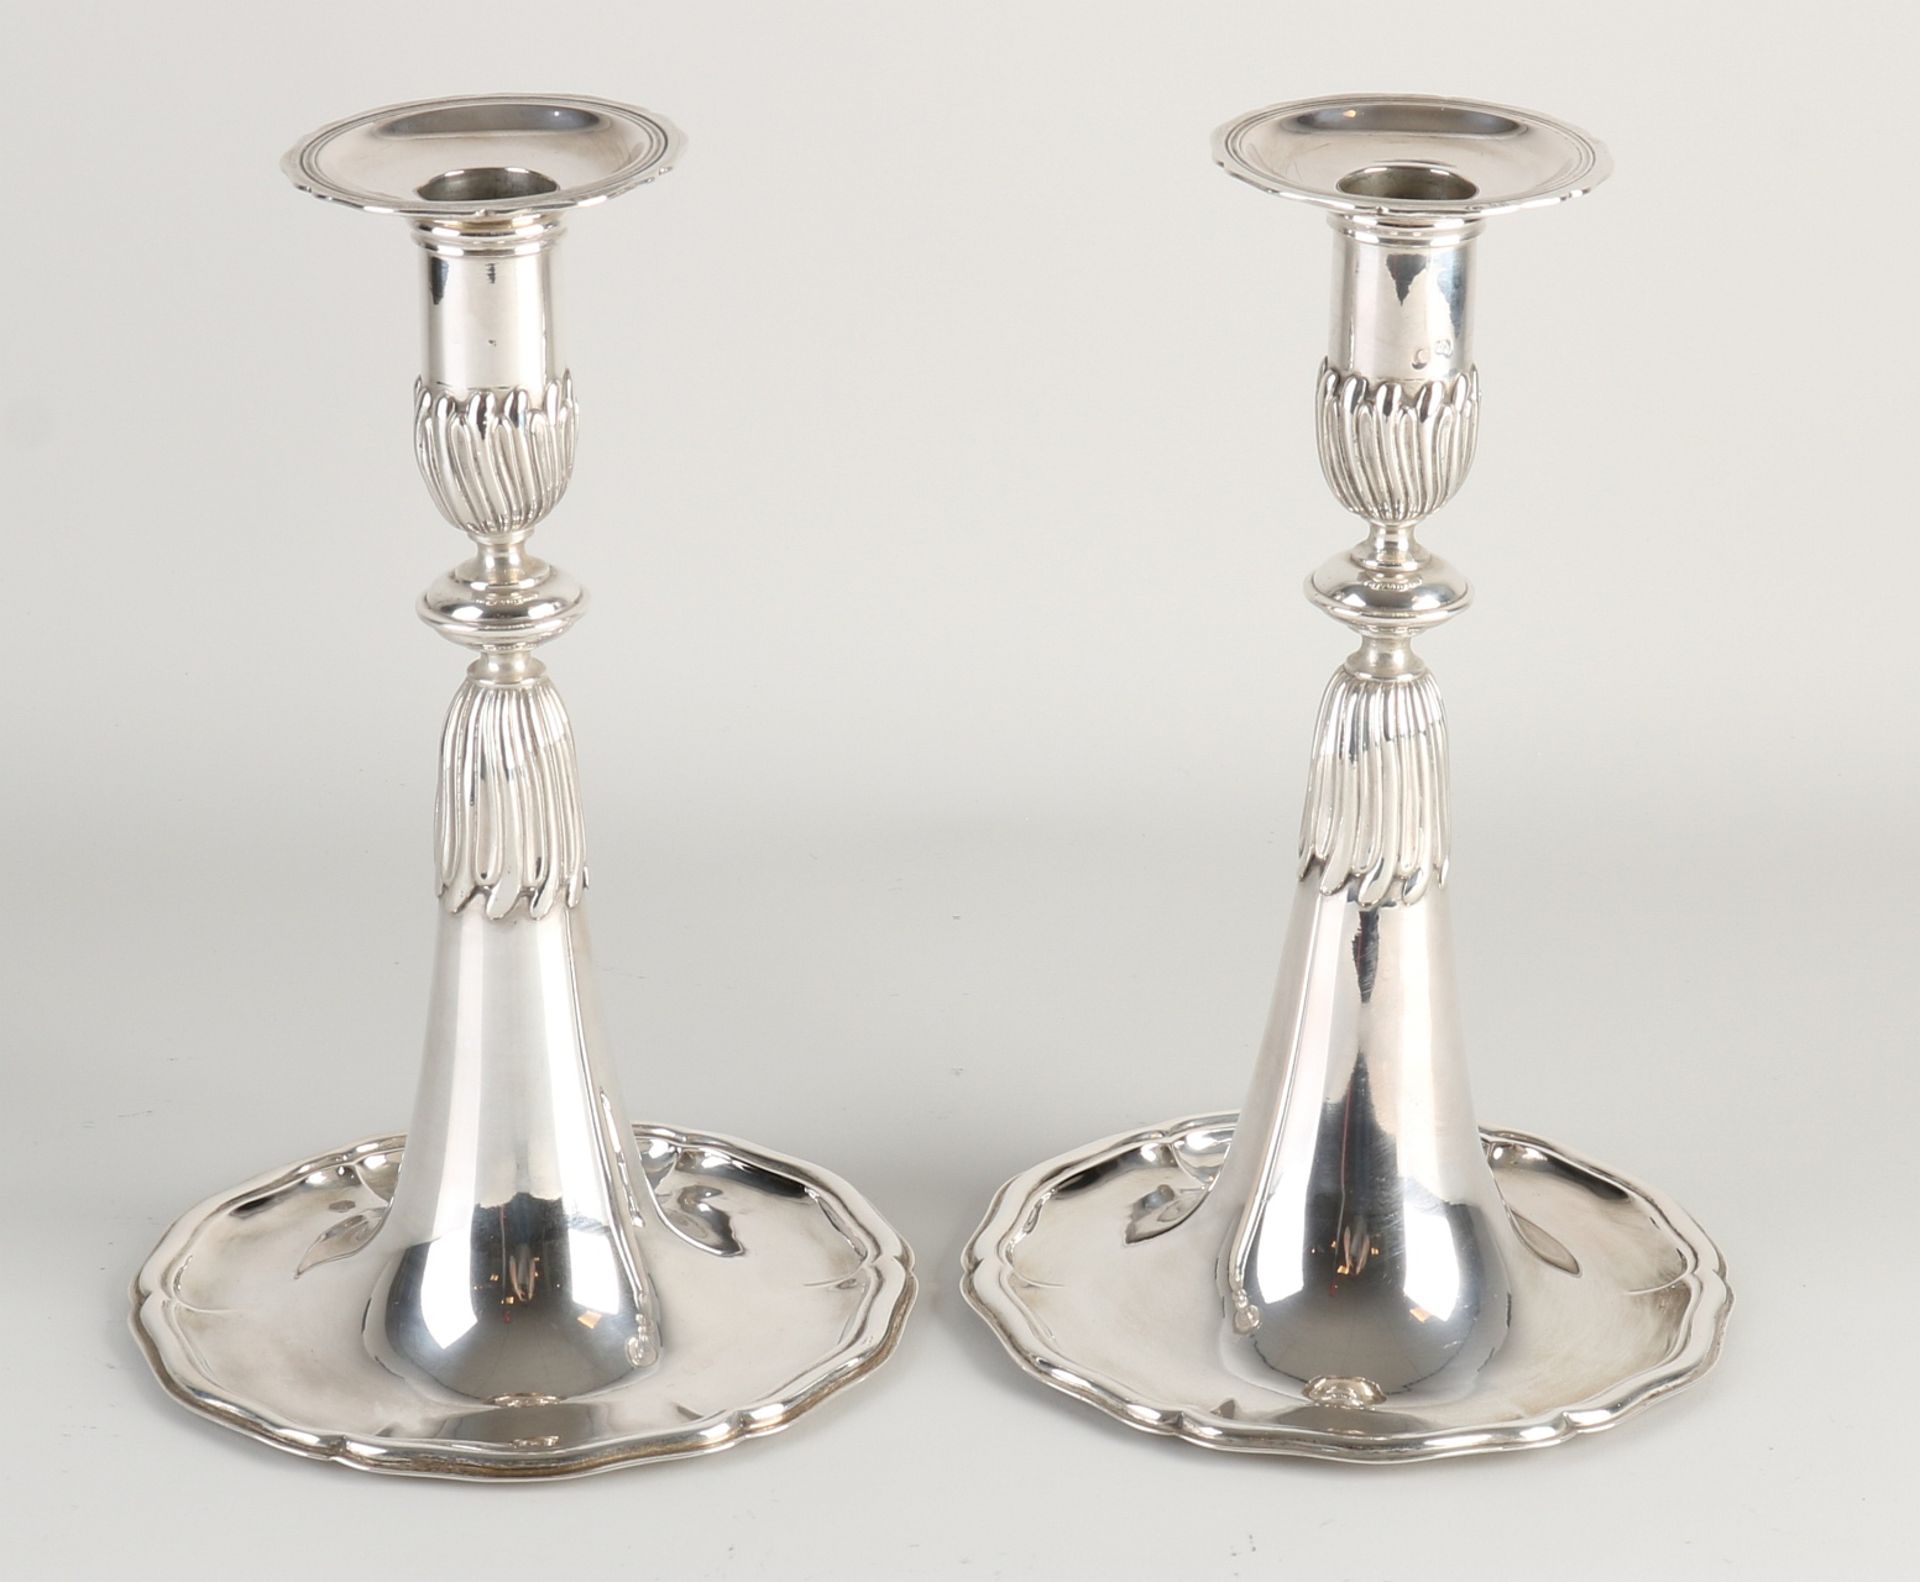 Two silver candlesticks, 18th century